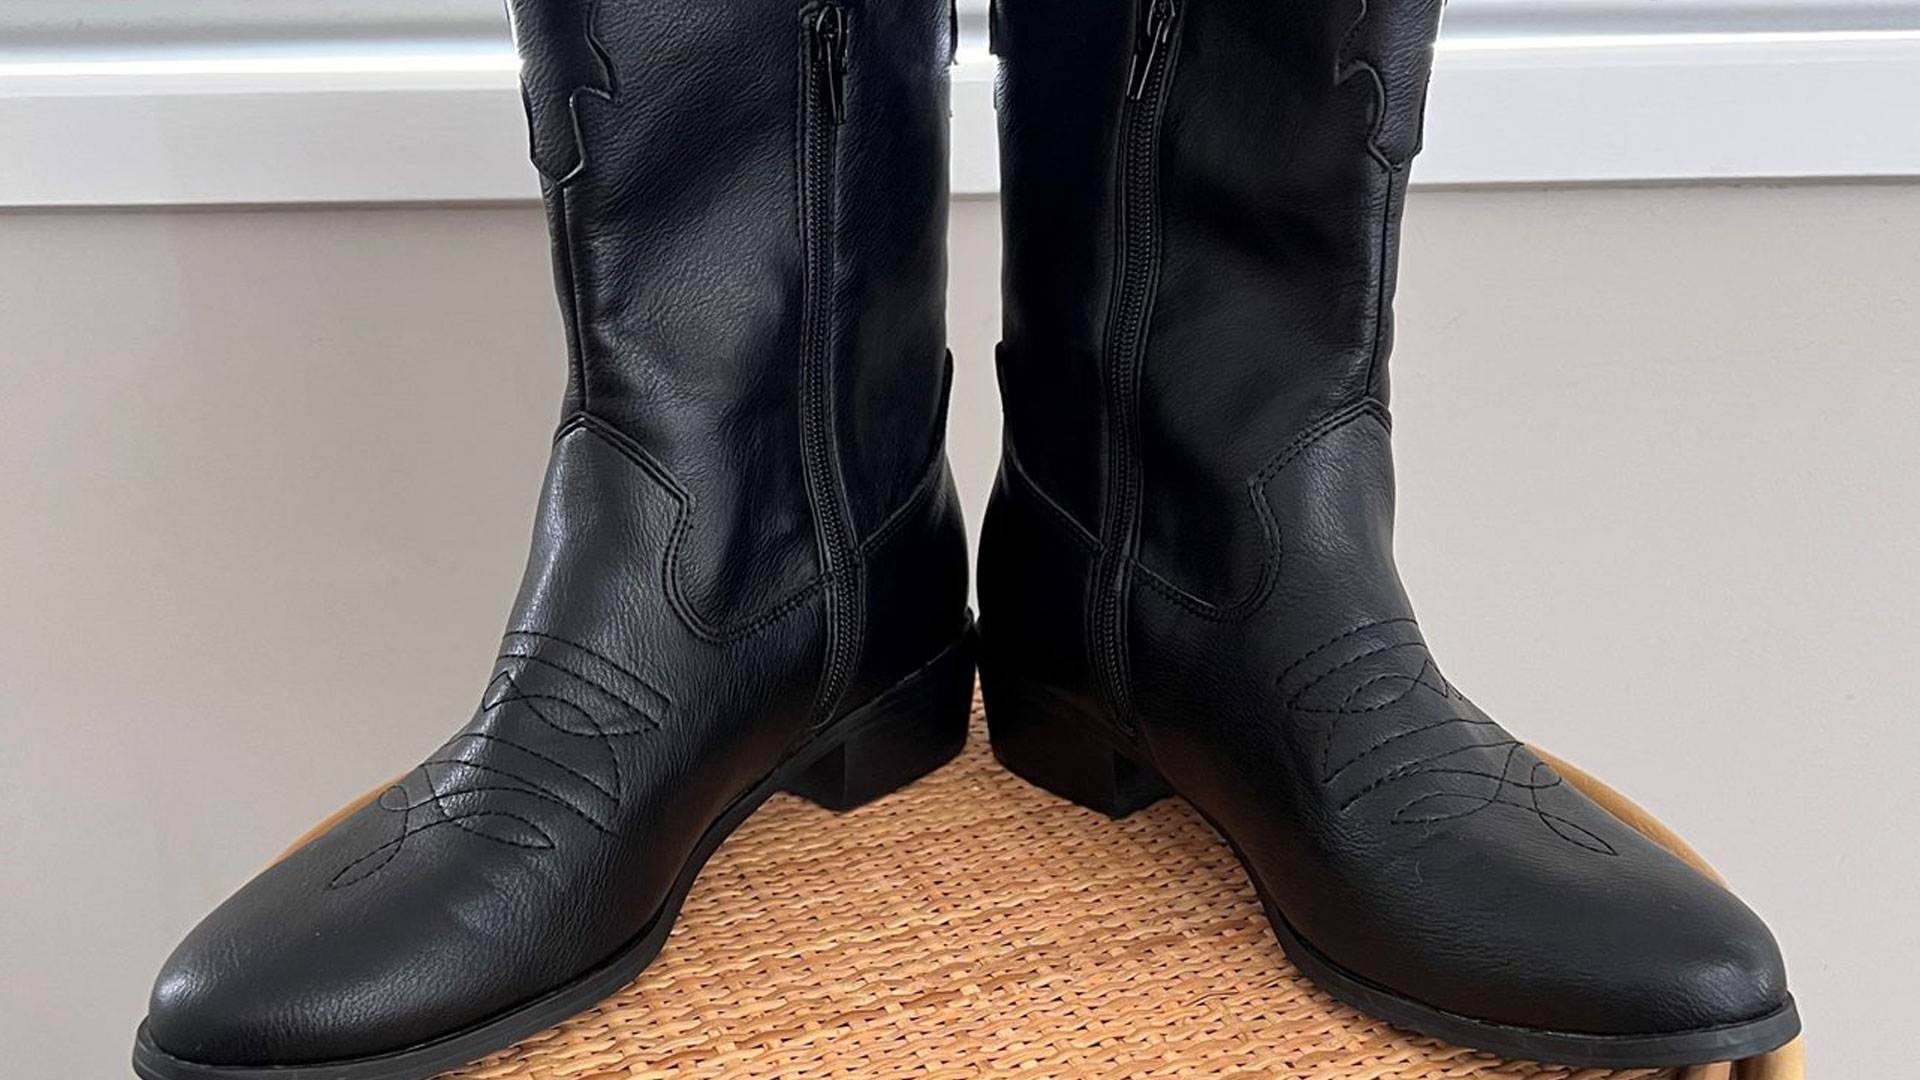 A pair of black knee high cowboy boots.